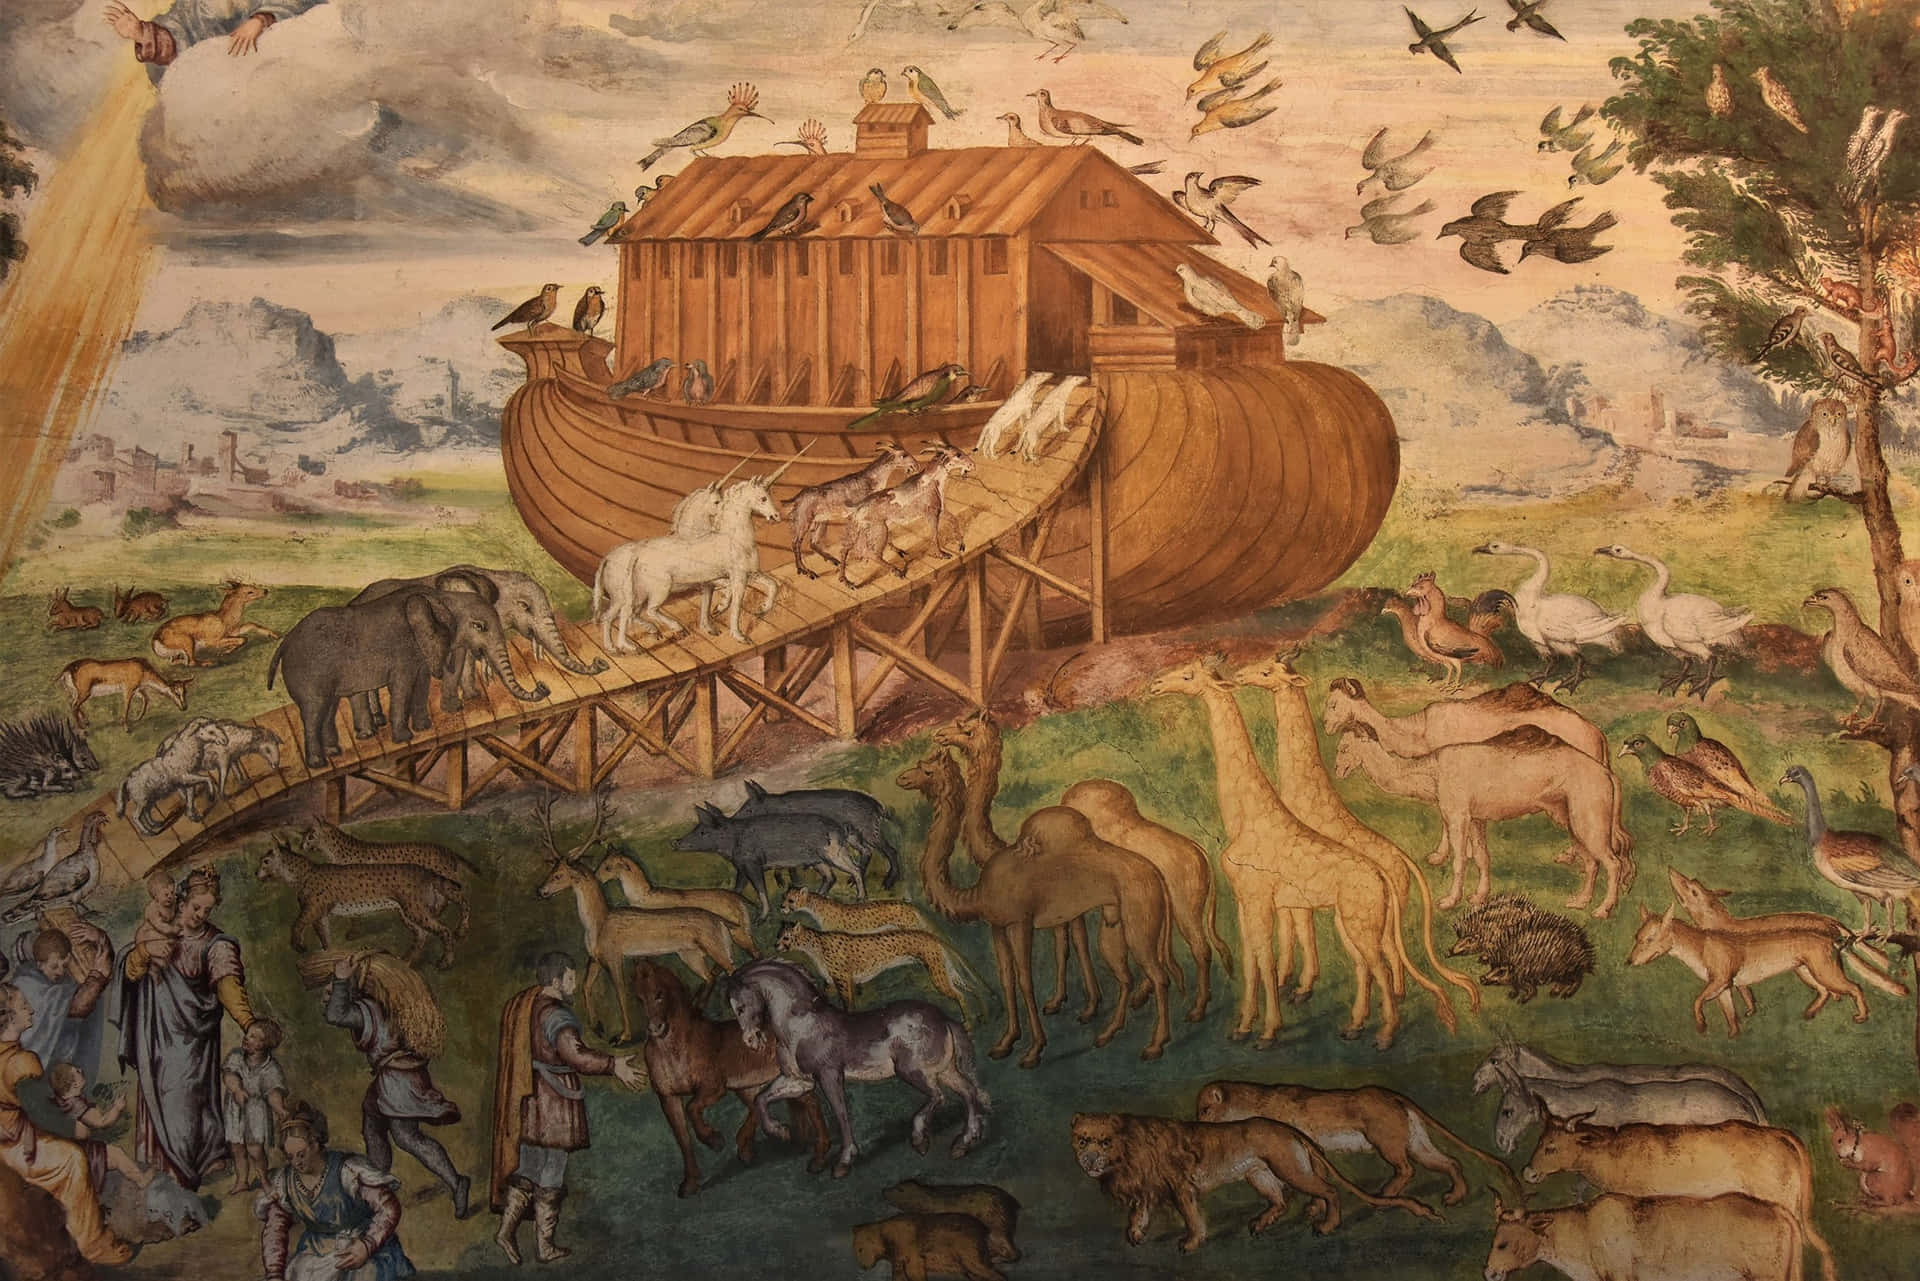 Noah's Ark In The Middle Of A Painting